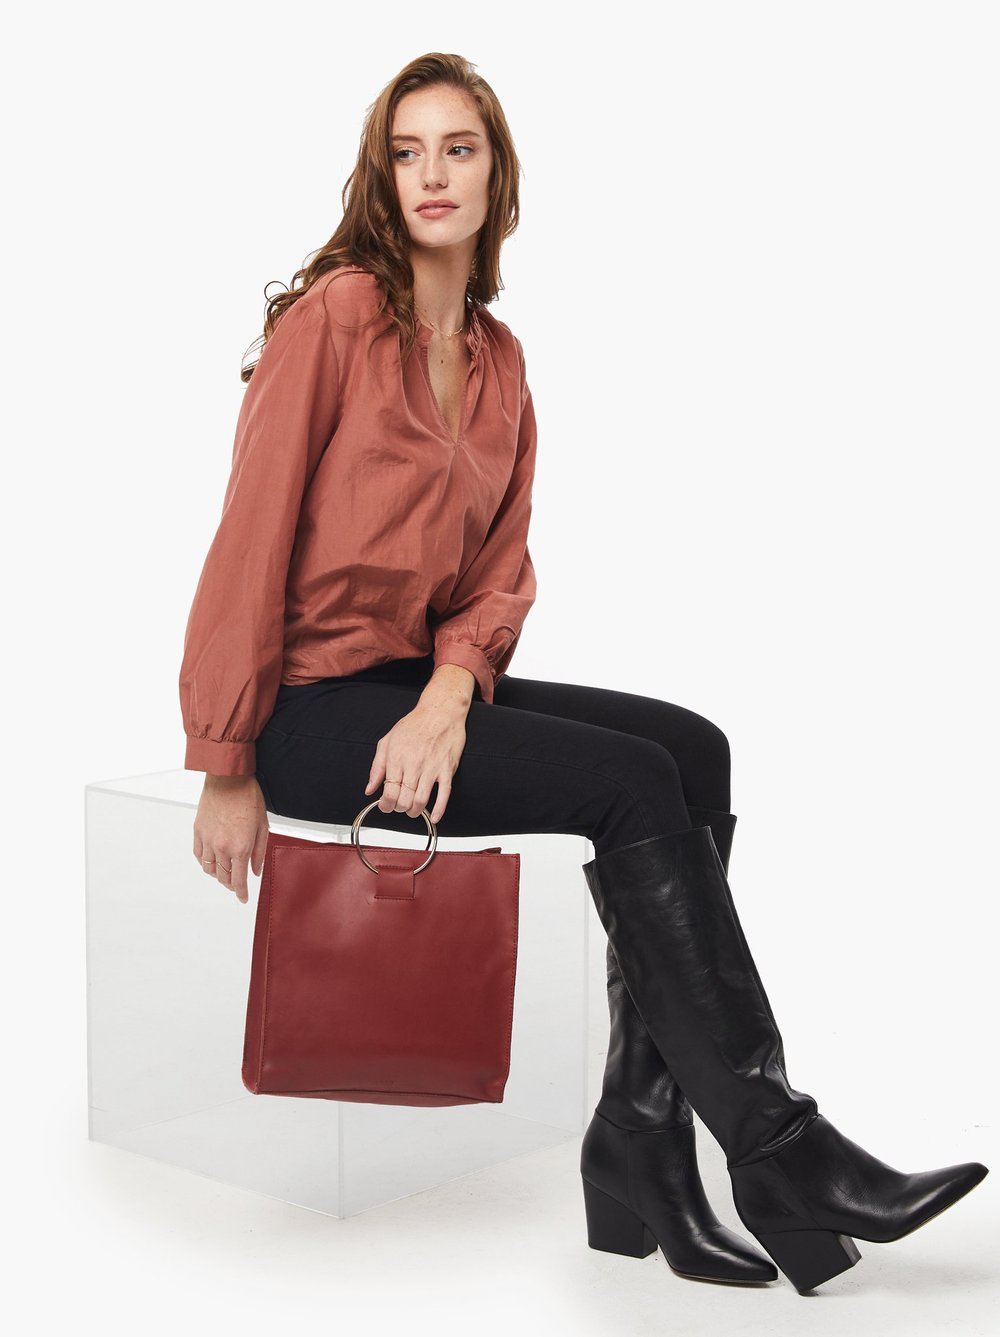 Fozi Tote - Brick Red - Kingfisher Road - Online Boutique